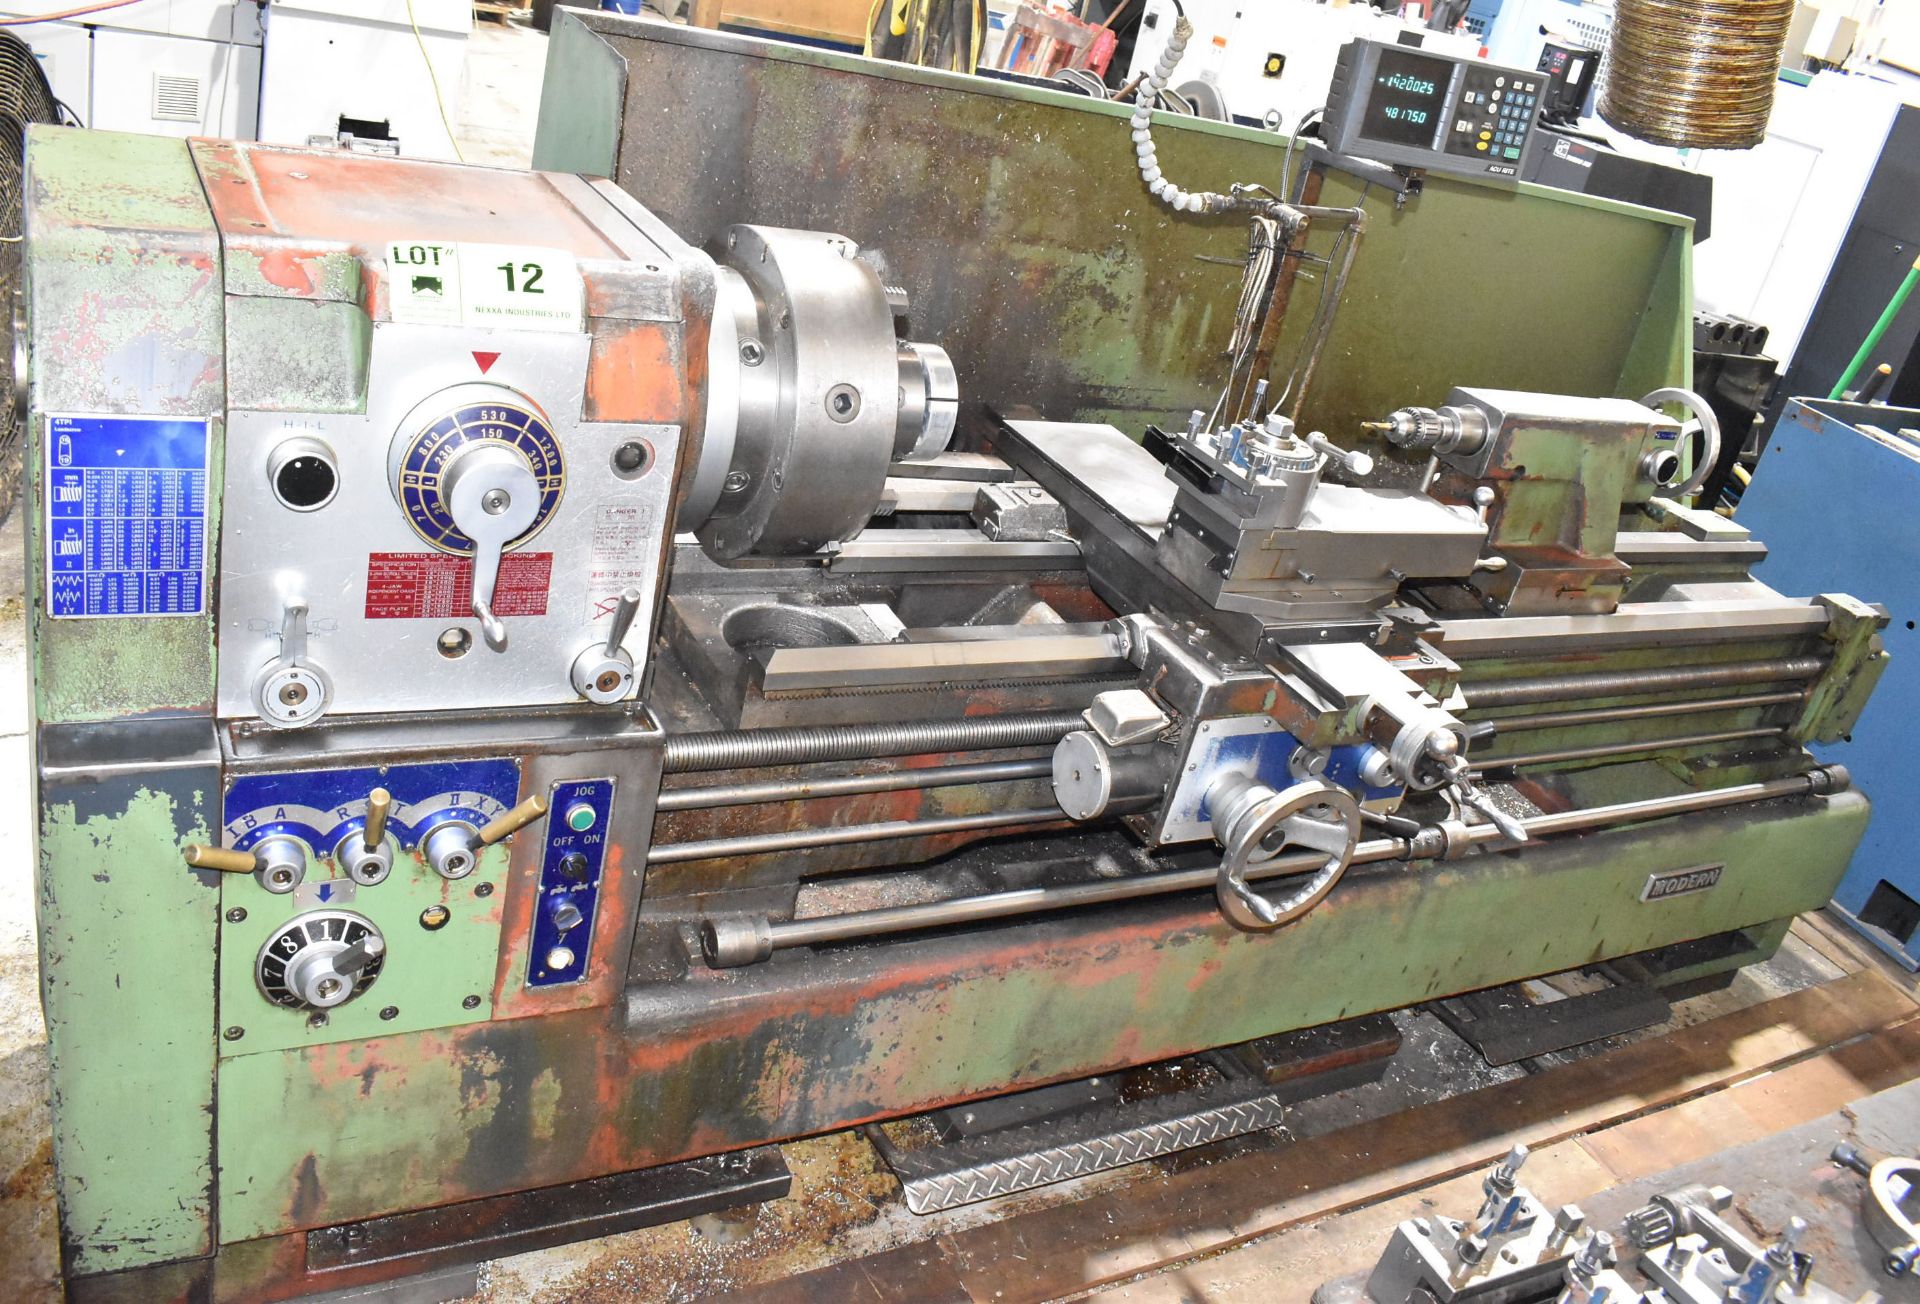 MODERN 22 80 GAP BED ENGINE LATHE WITH 22" SWING OVER BED, 31-3/8" SWING OVER GAP, 80" BETWEEN